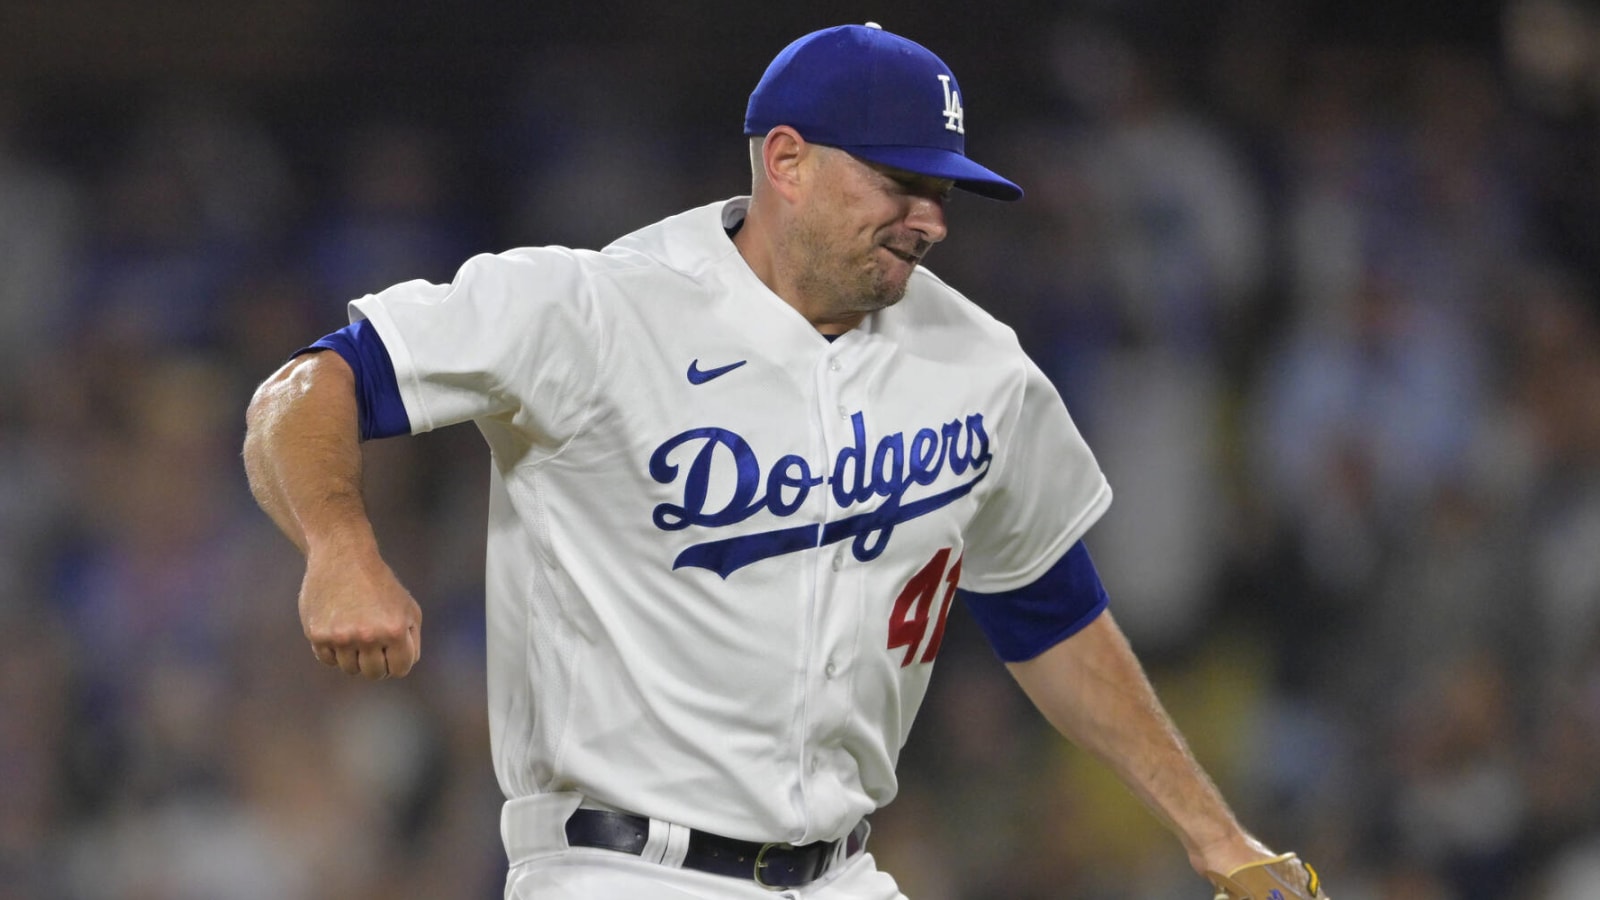 Dodgers sign ex-World Series champion to minor league deal